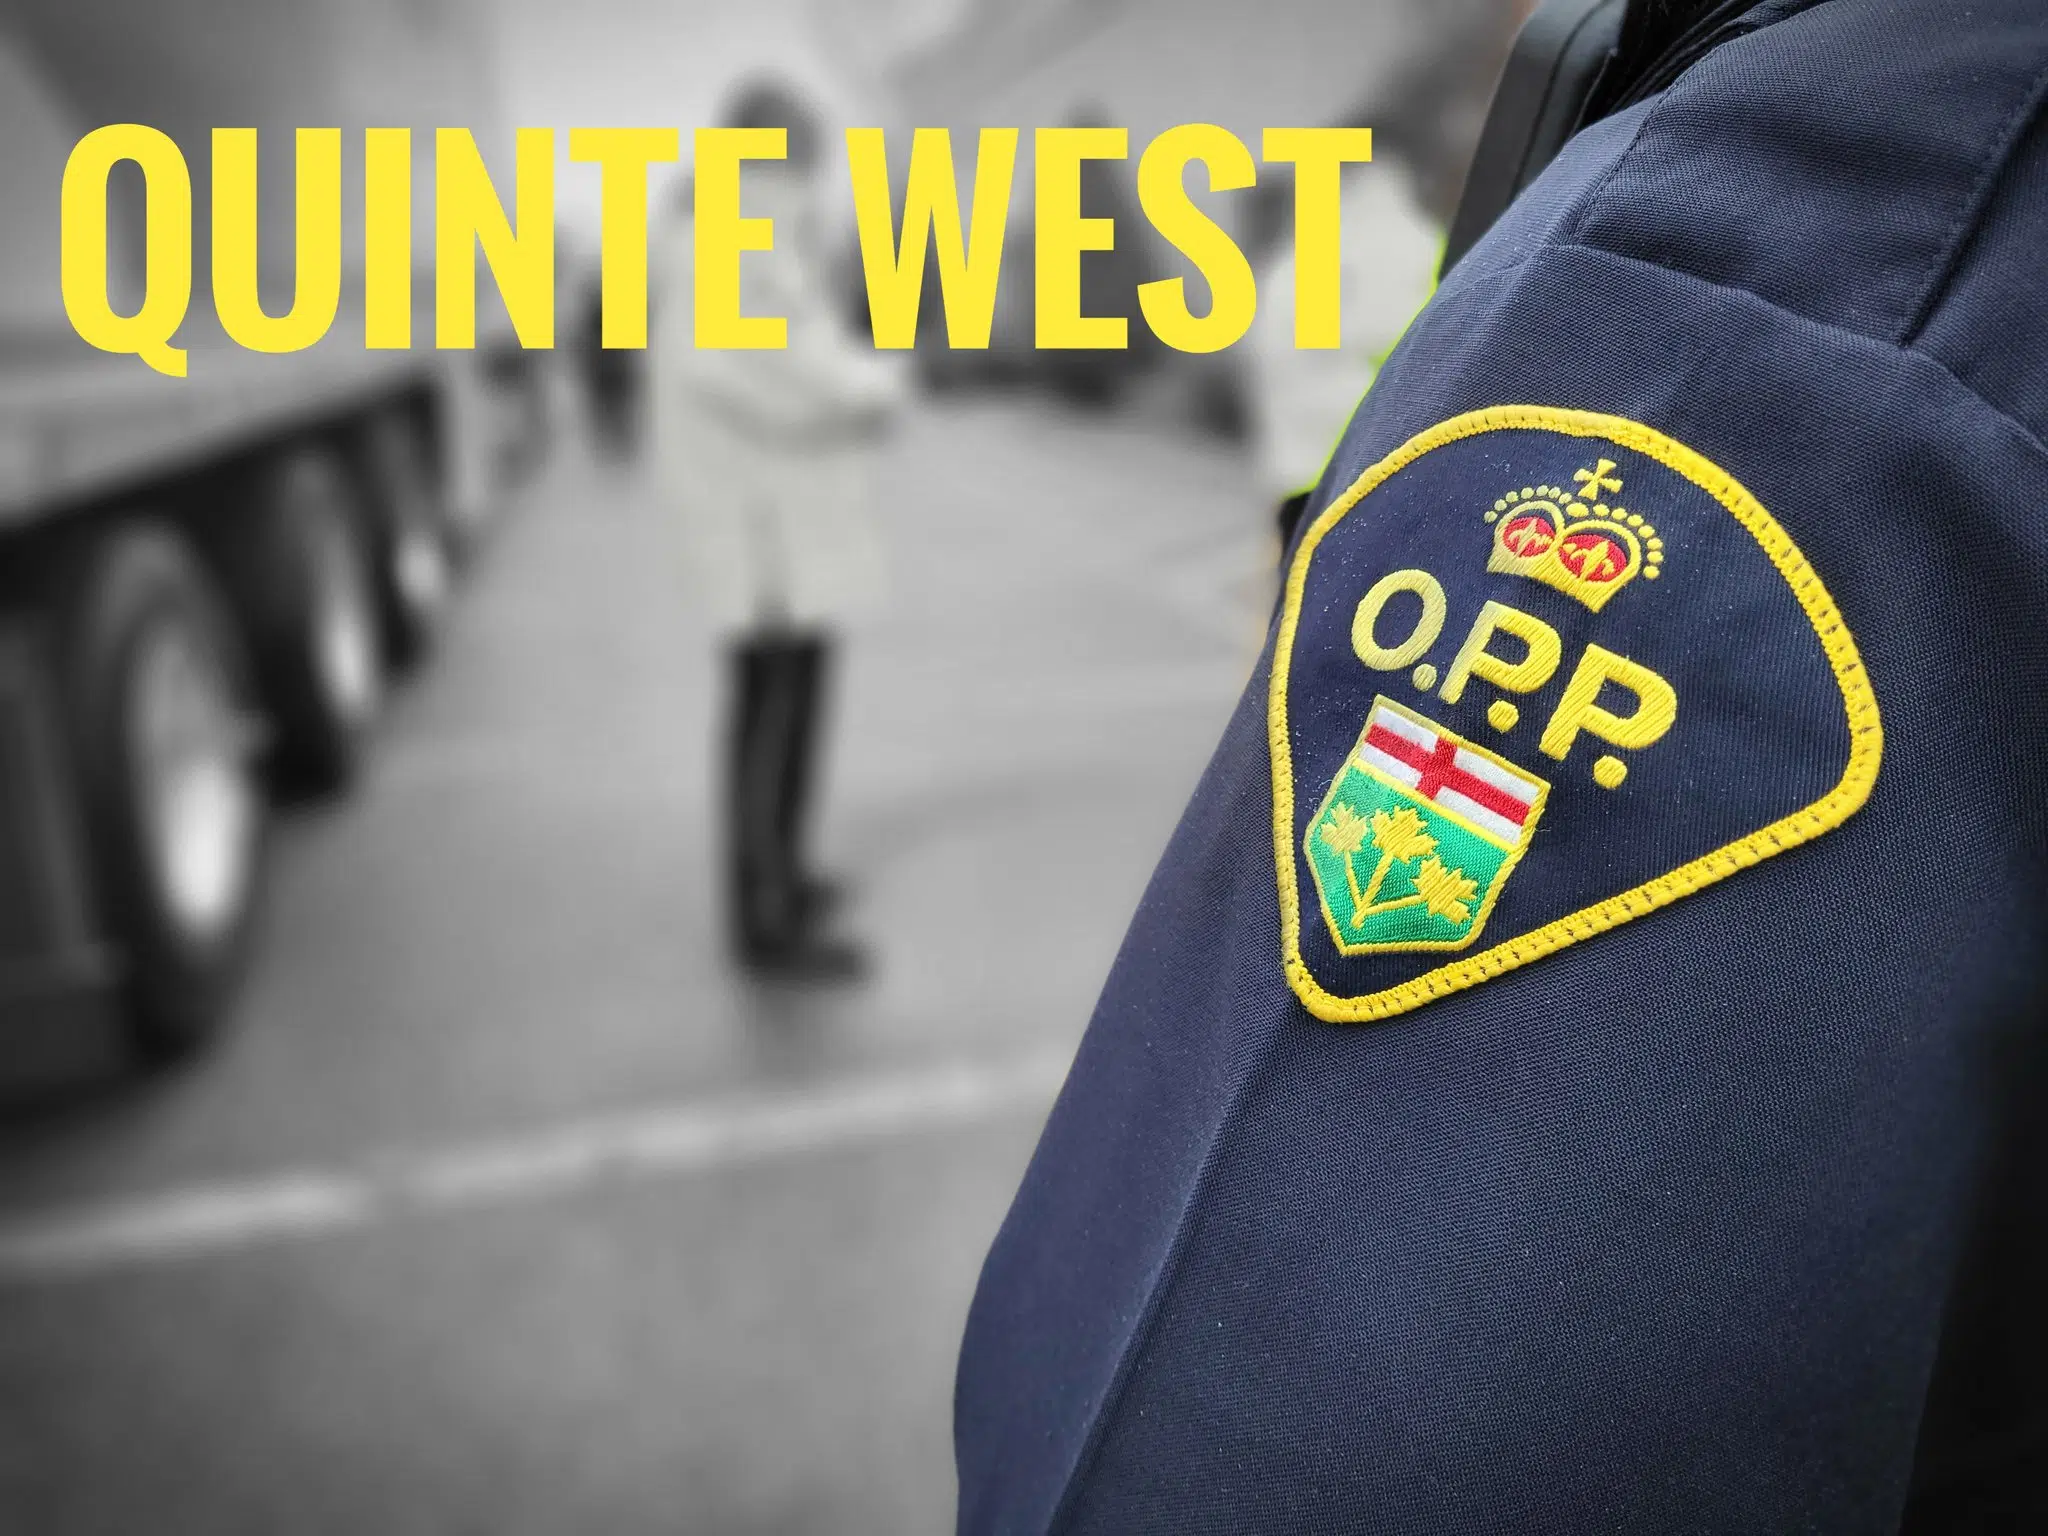 Four people charged with drug trafficking in Quinte West